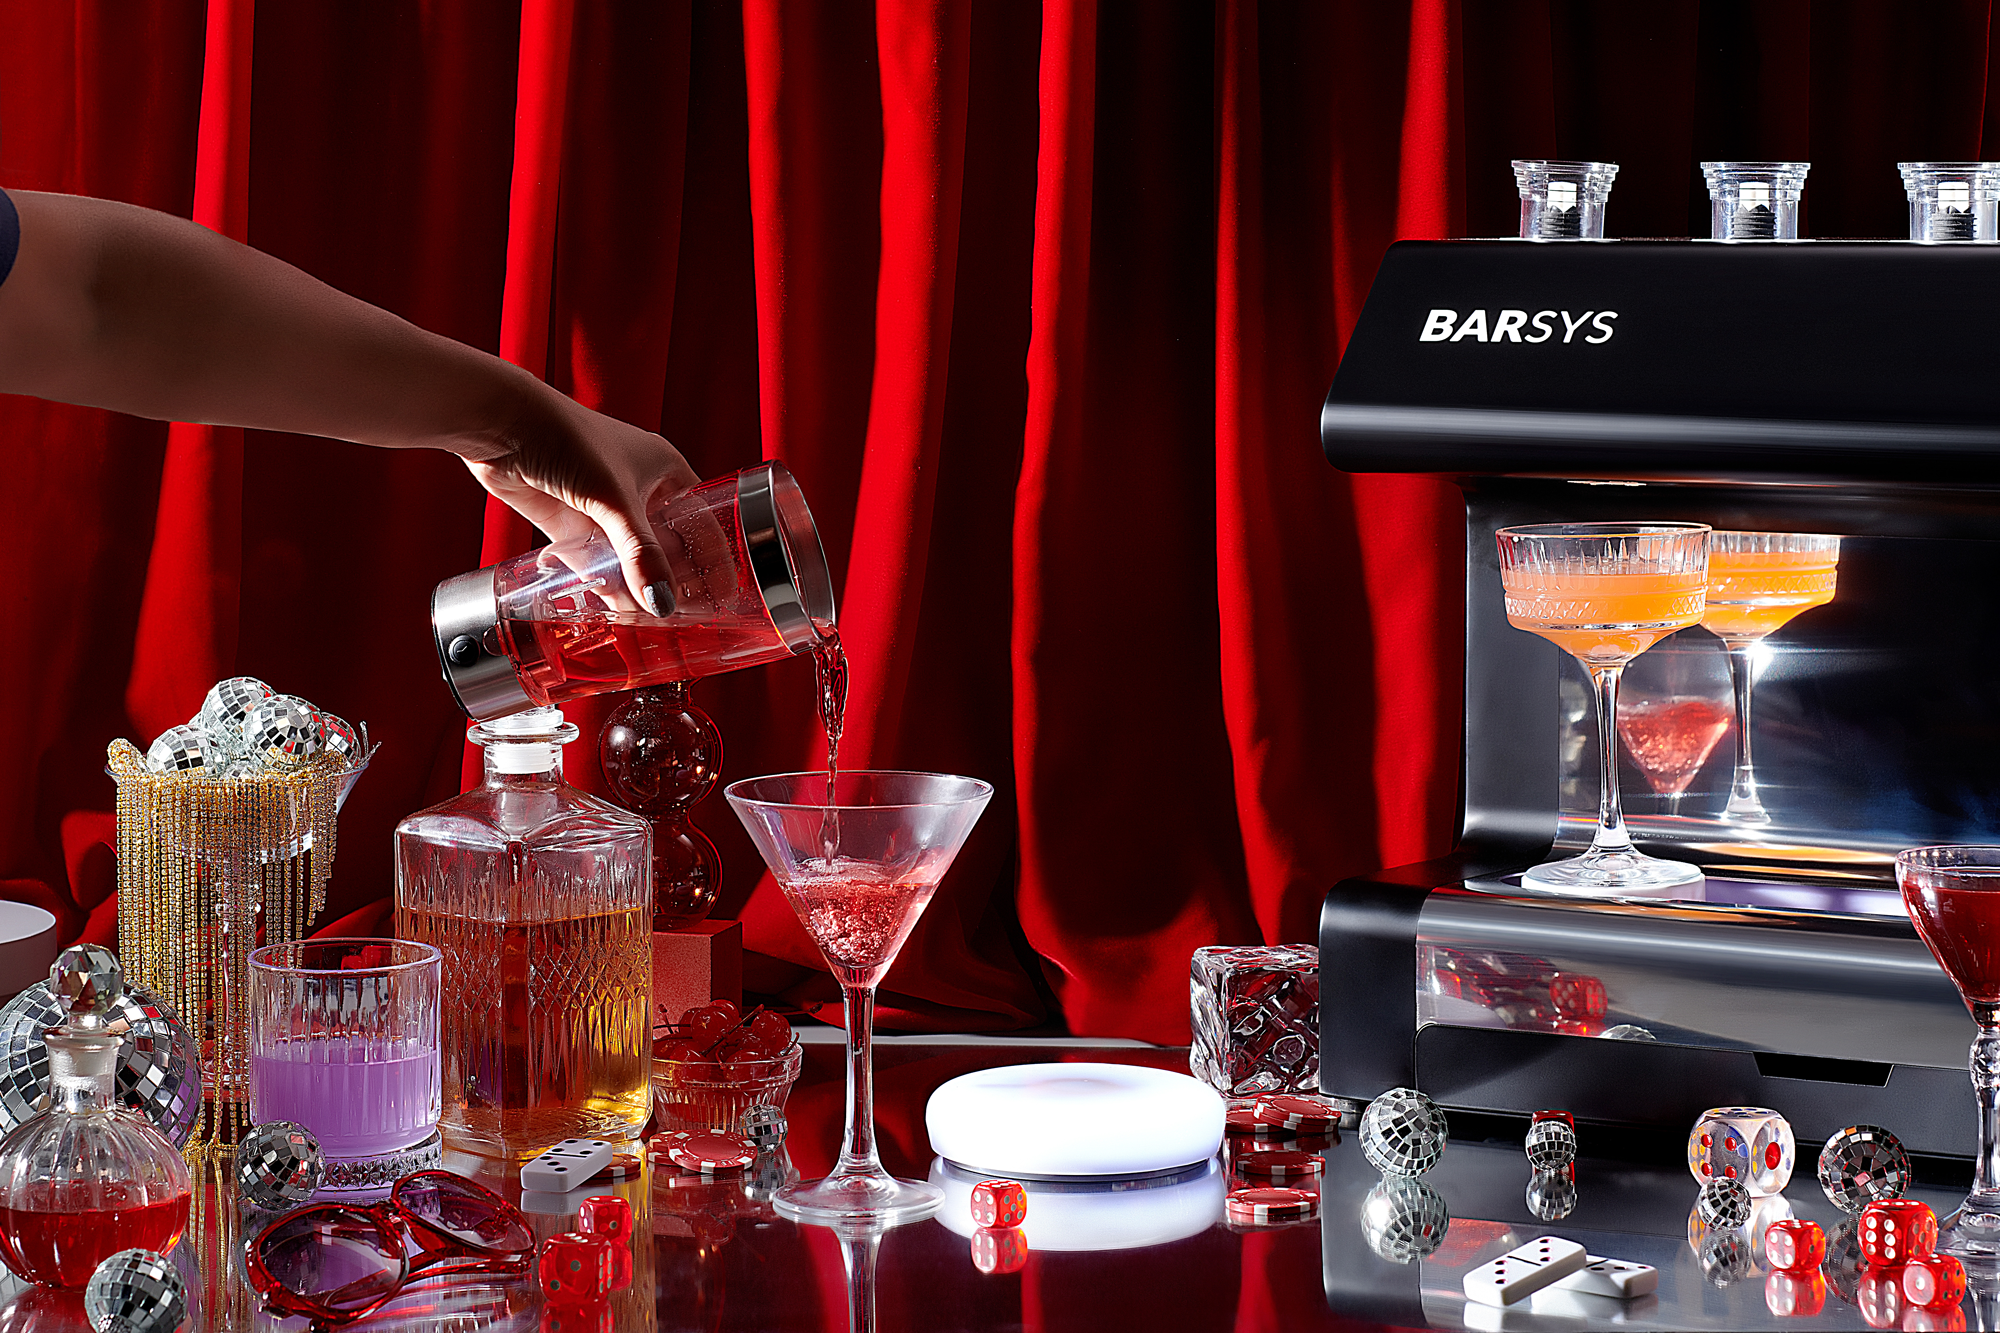 Meet your new personal bartender. Introducing the bev by BLACK+